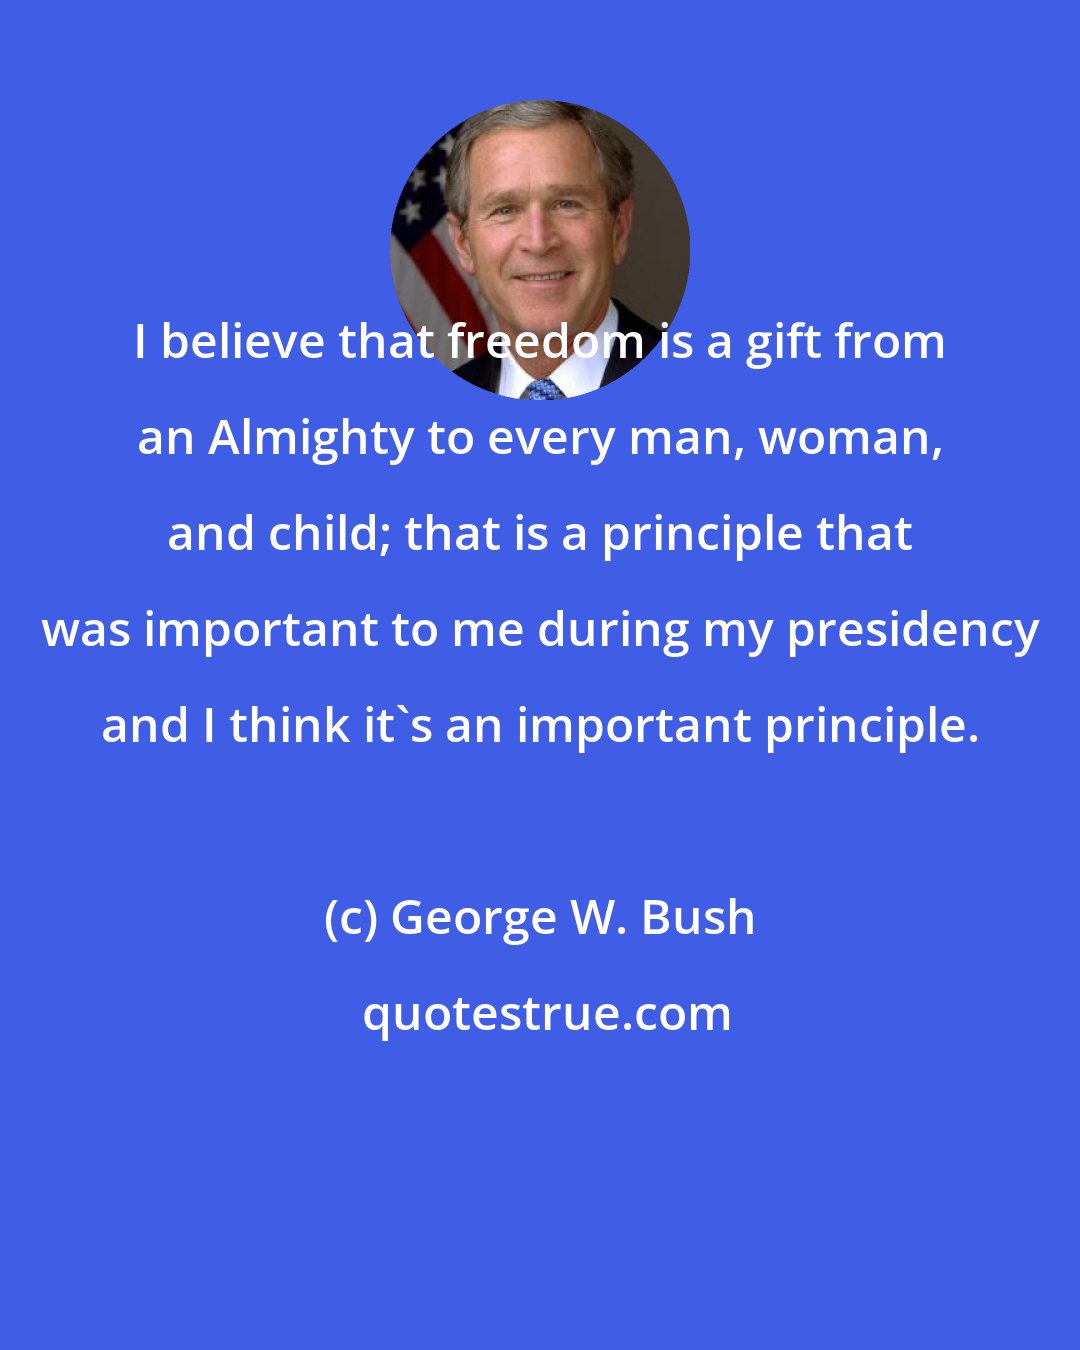 George W. Bush: I believe that freedom is a gift from an Almighty to every man, woman, and child; that is a principle that was important to me during my presidency and I think it's an important principle.